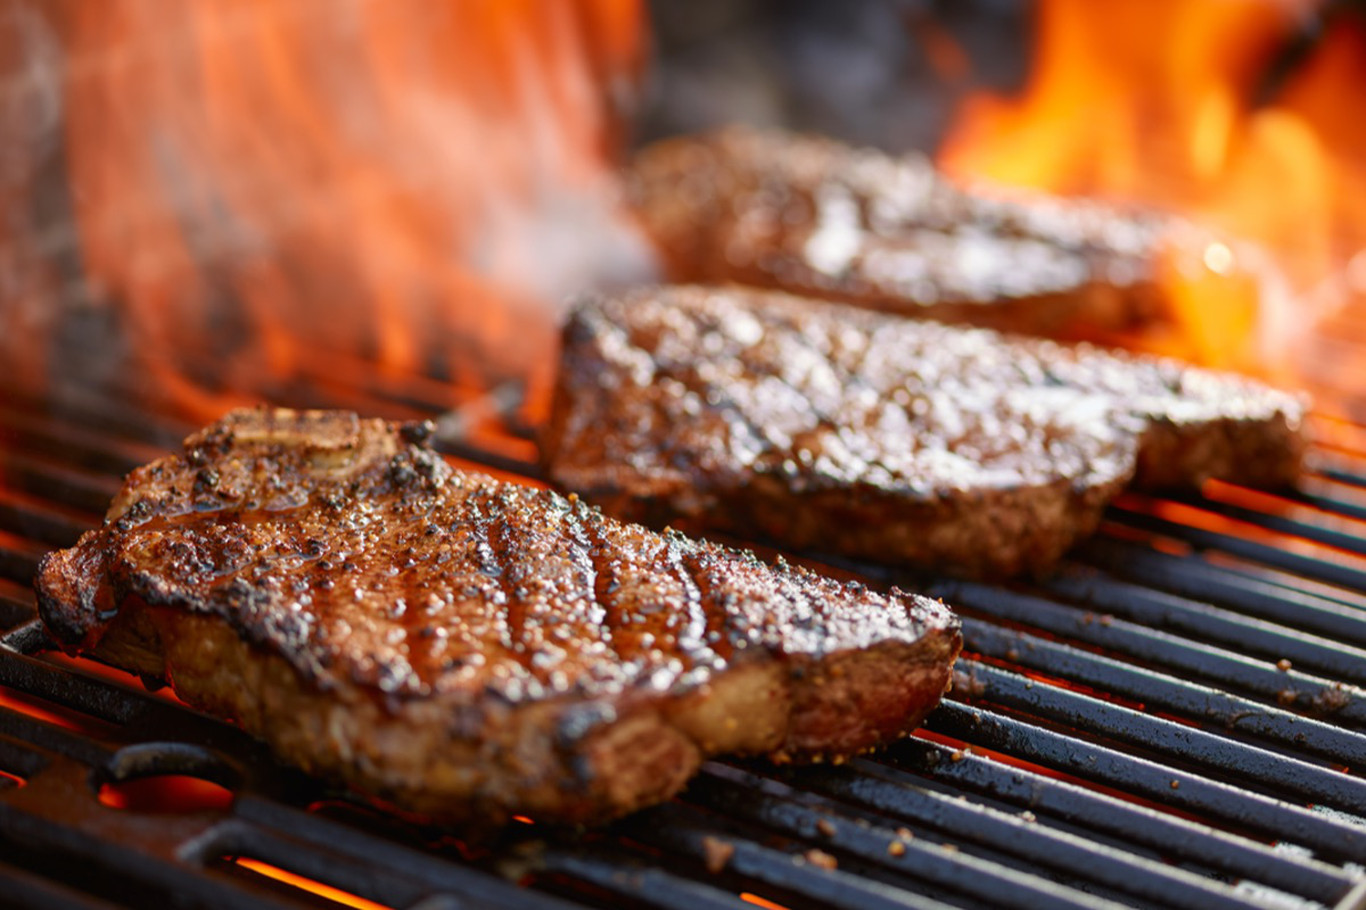 Treat dad to a great steak at LongHorn Steakhouse this Father's Day